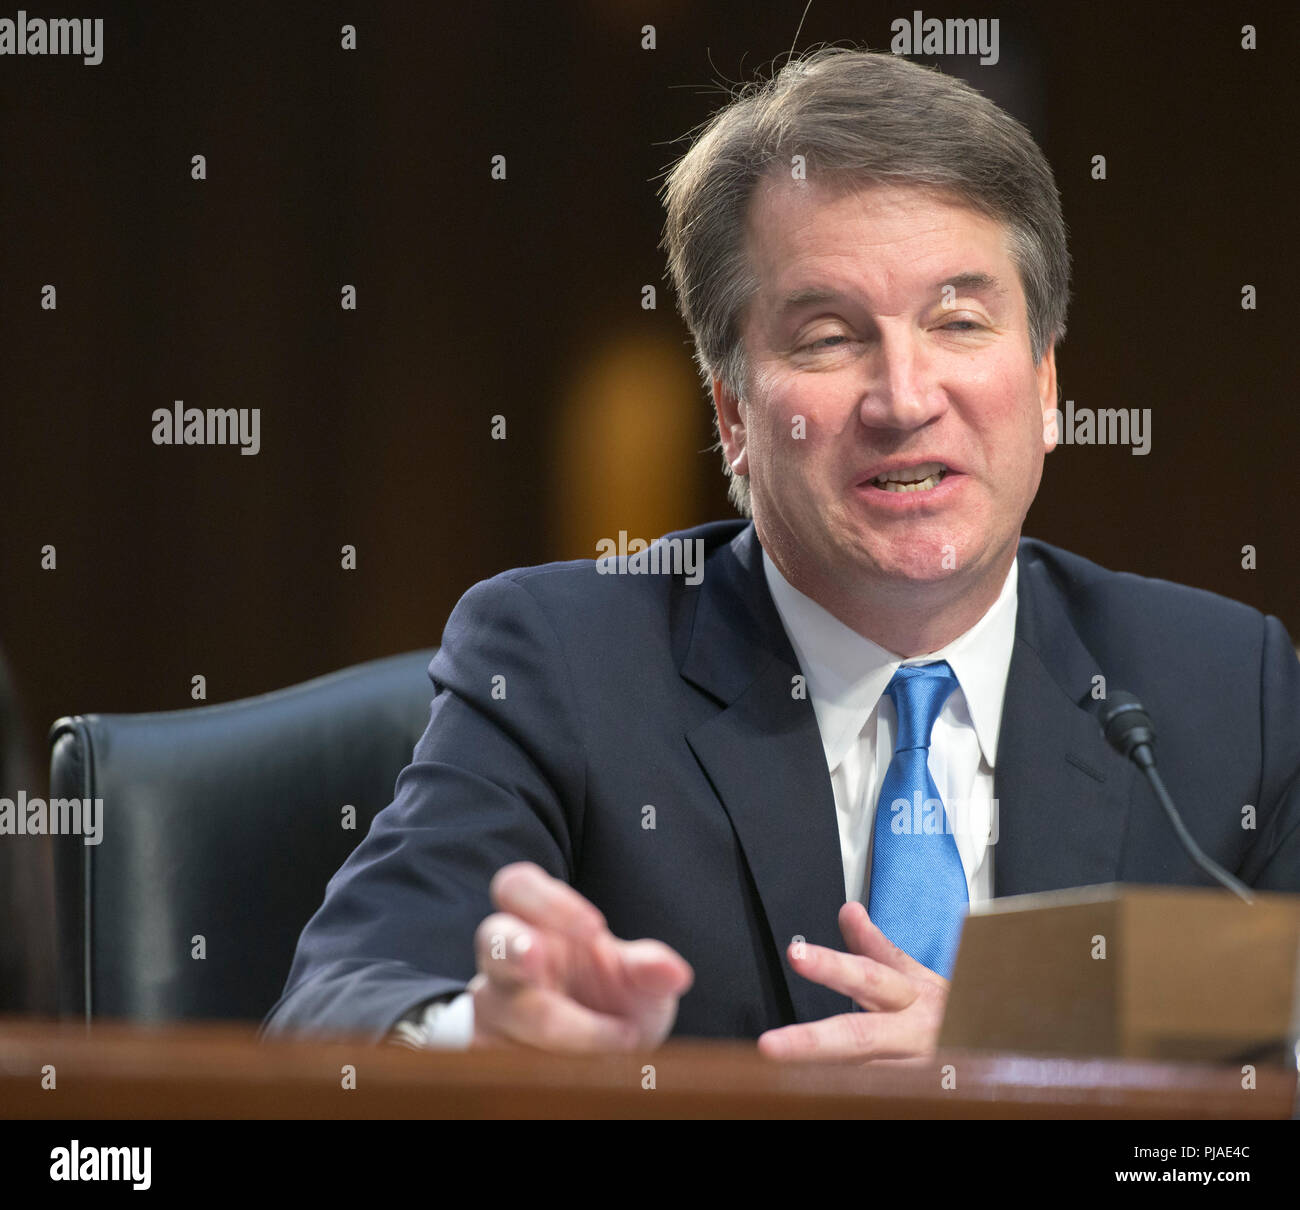 Washington DC, USA. September 5,2018, USA: Judge Brett Kavanaugh attends his confirmation hearing to become the next Supreme Court Justice on Capitol Hill in Washington DC.   Patsy Lynch/Alamy Credit: Patsy Lynch/Alamy Live News Stock Photo